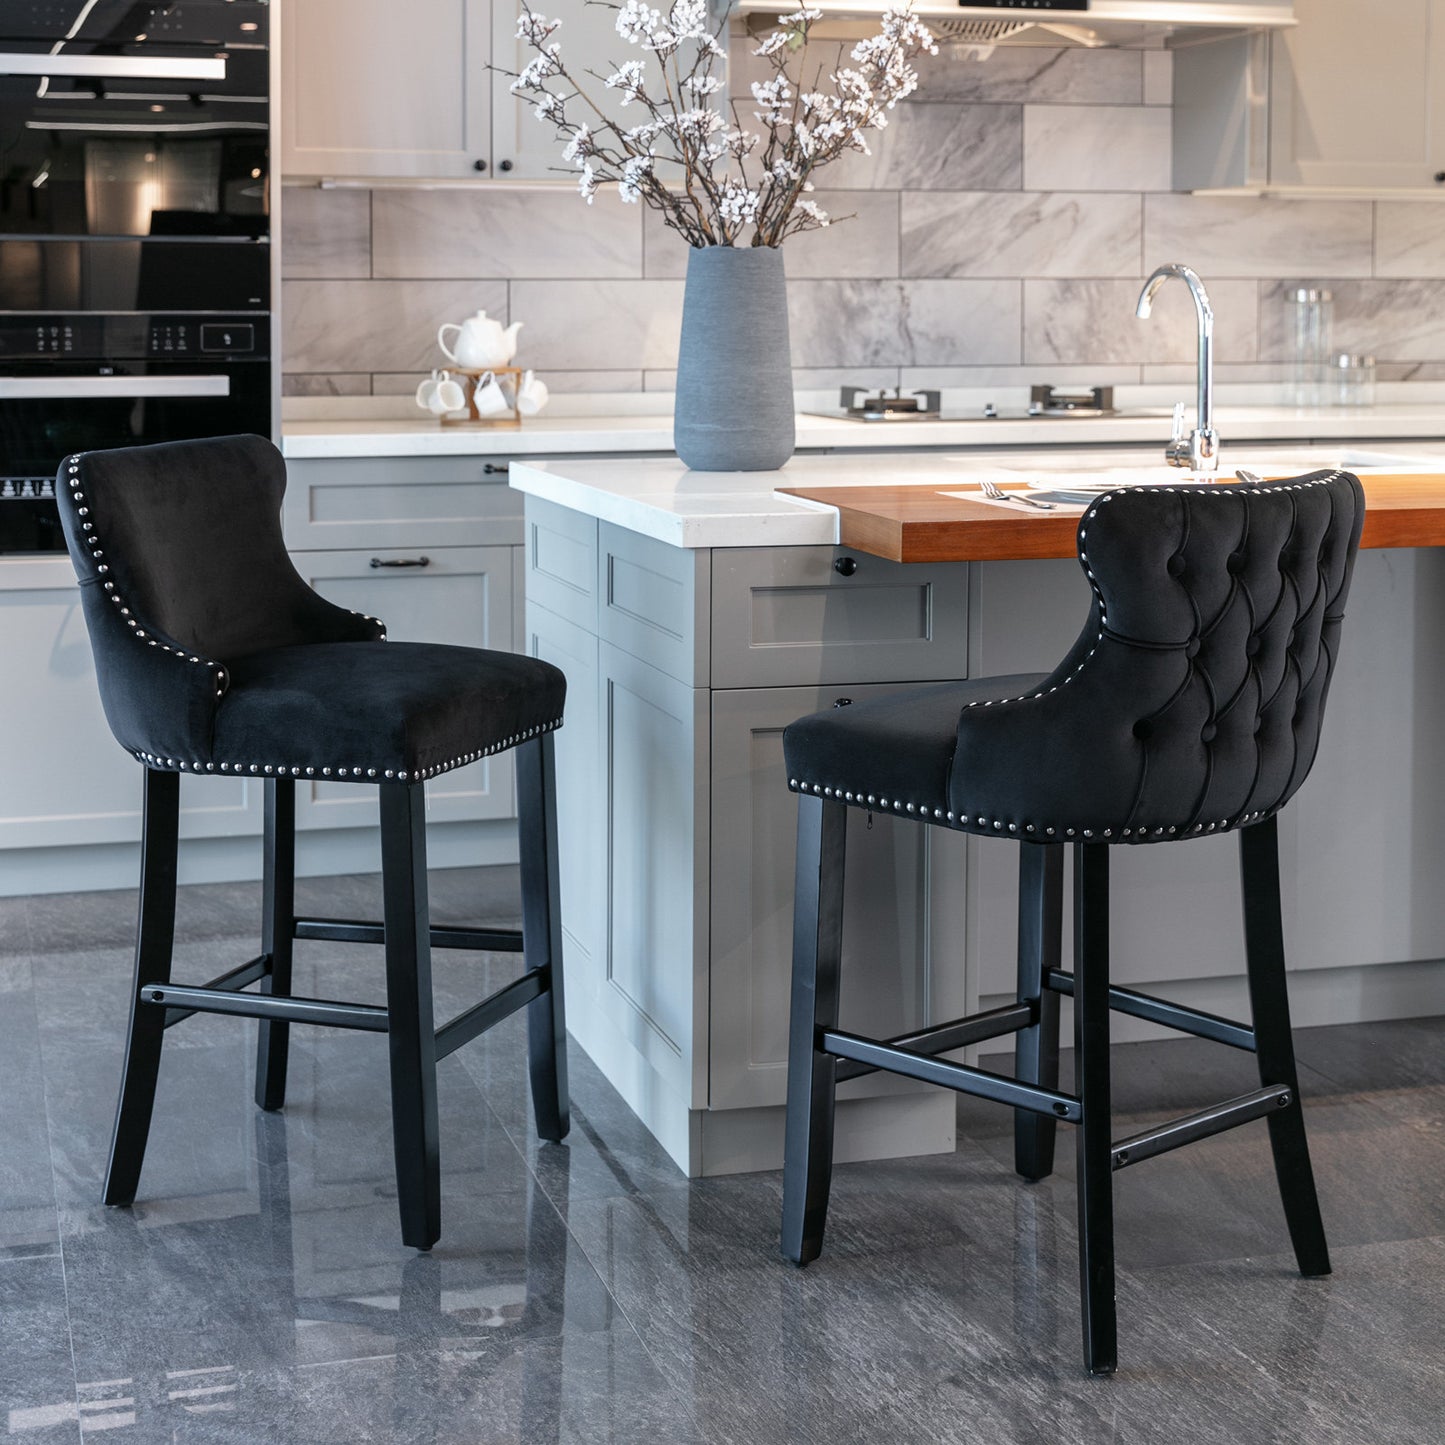 A&A Furniture,Contemporary Velvet Upholstered Wing-Back Barstools with Button Tufted Decoration and Wooden Legs, and Chrome Nailhead Trim, Leisure Style Bar Chairs,Bar stools,Set of 2 (Black),SW1824BK